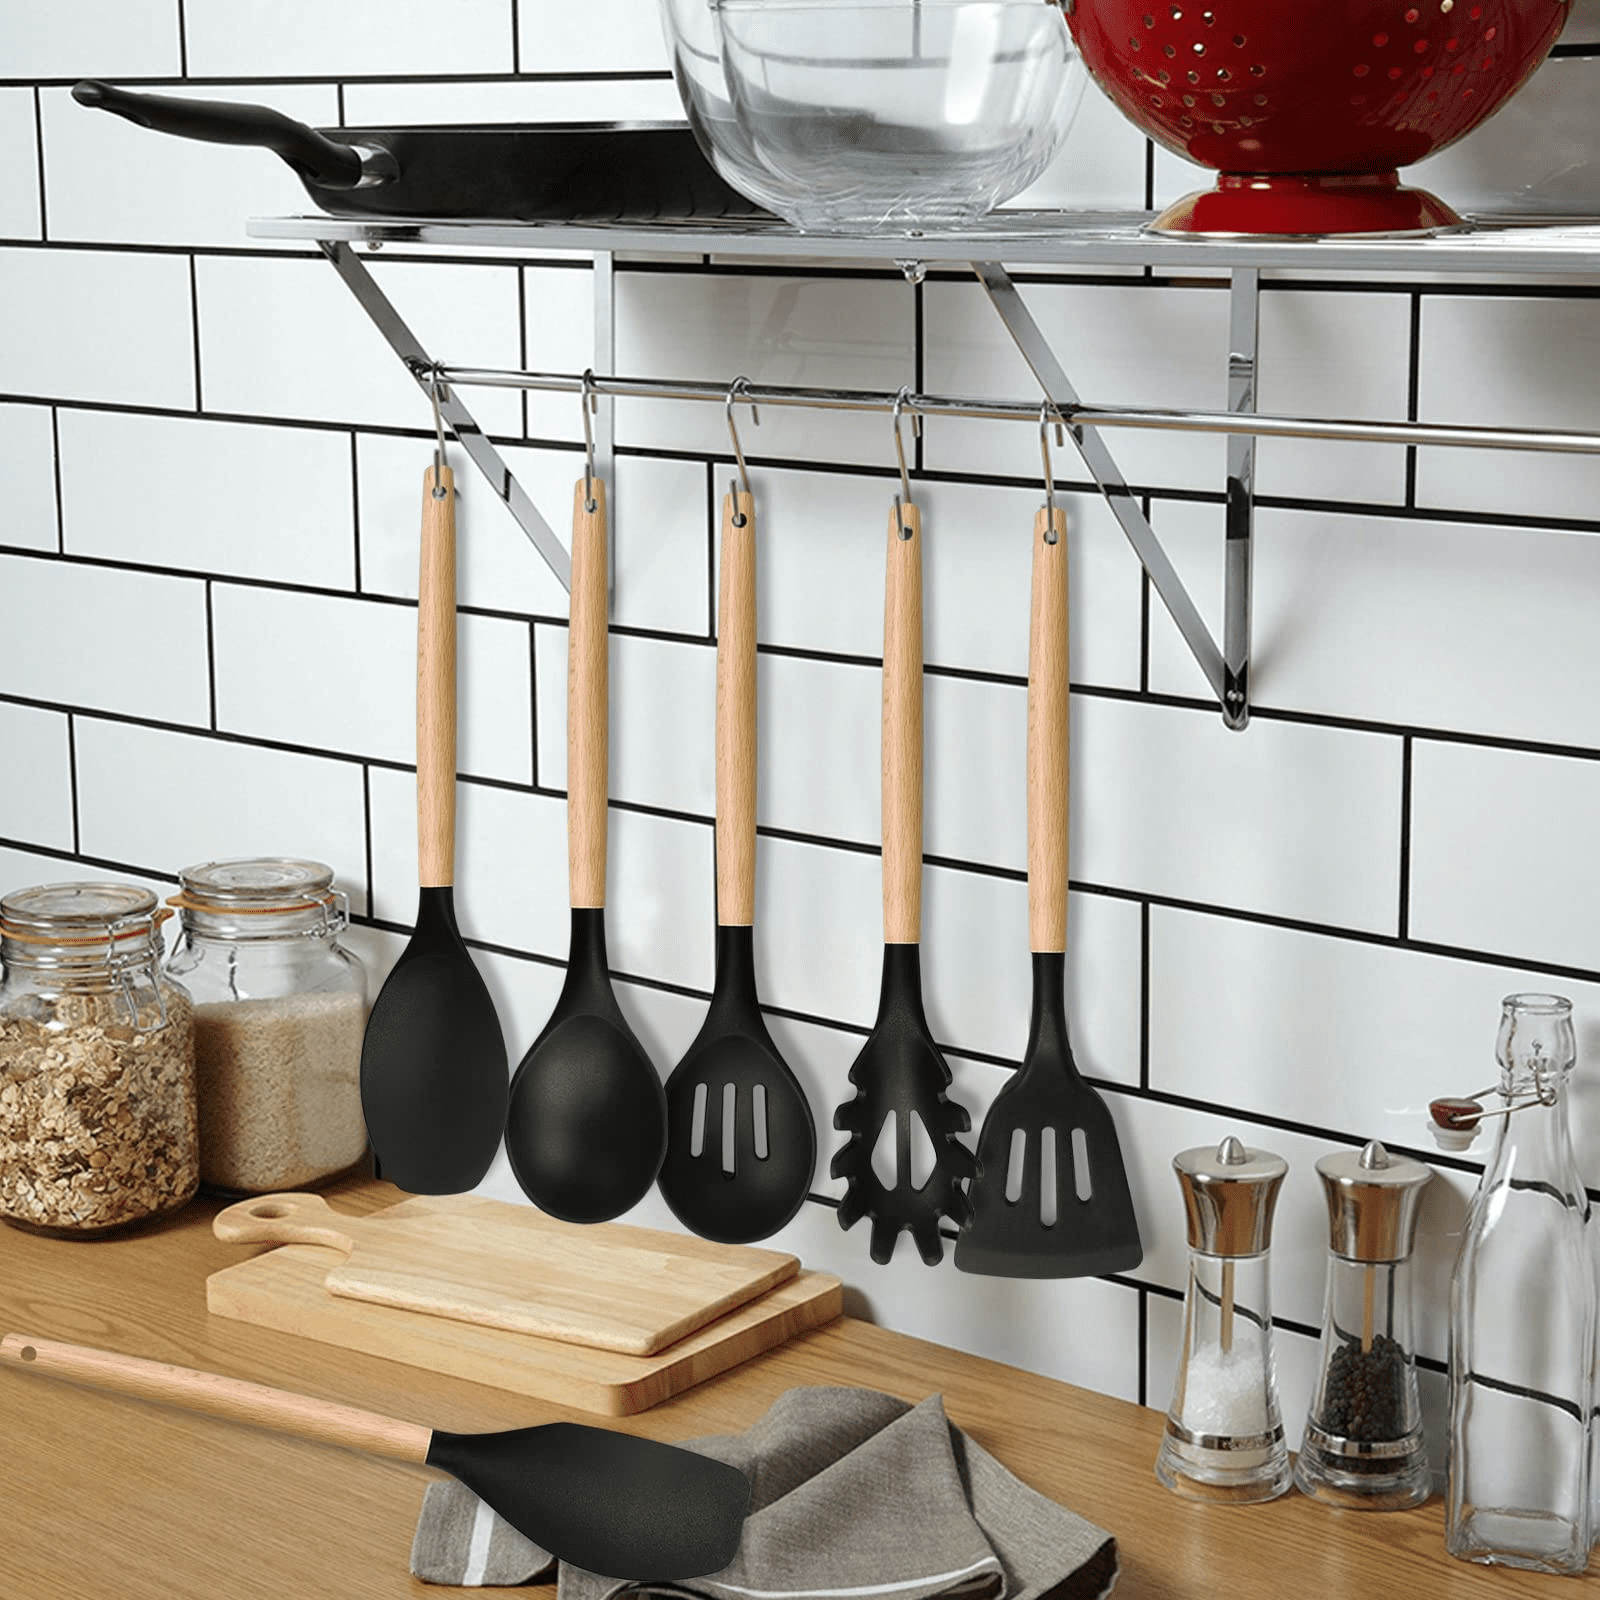 Cooking Utensils Set of 6, E-far Silicone Kitchen Utensils with Wooden  Handle, Non-stick Cookware Fr…See more Cooking Utensils Set of 6, E-far